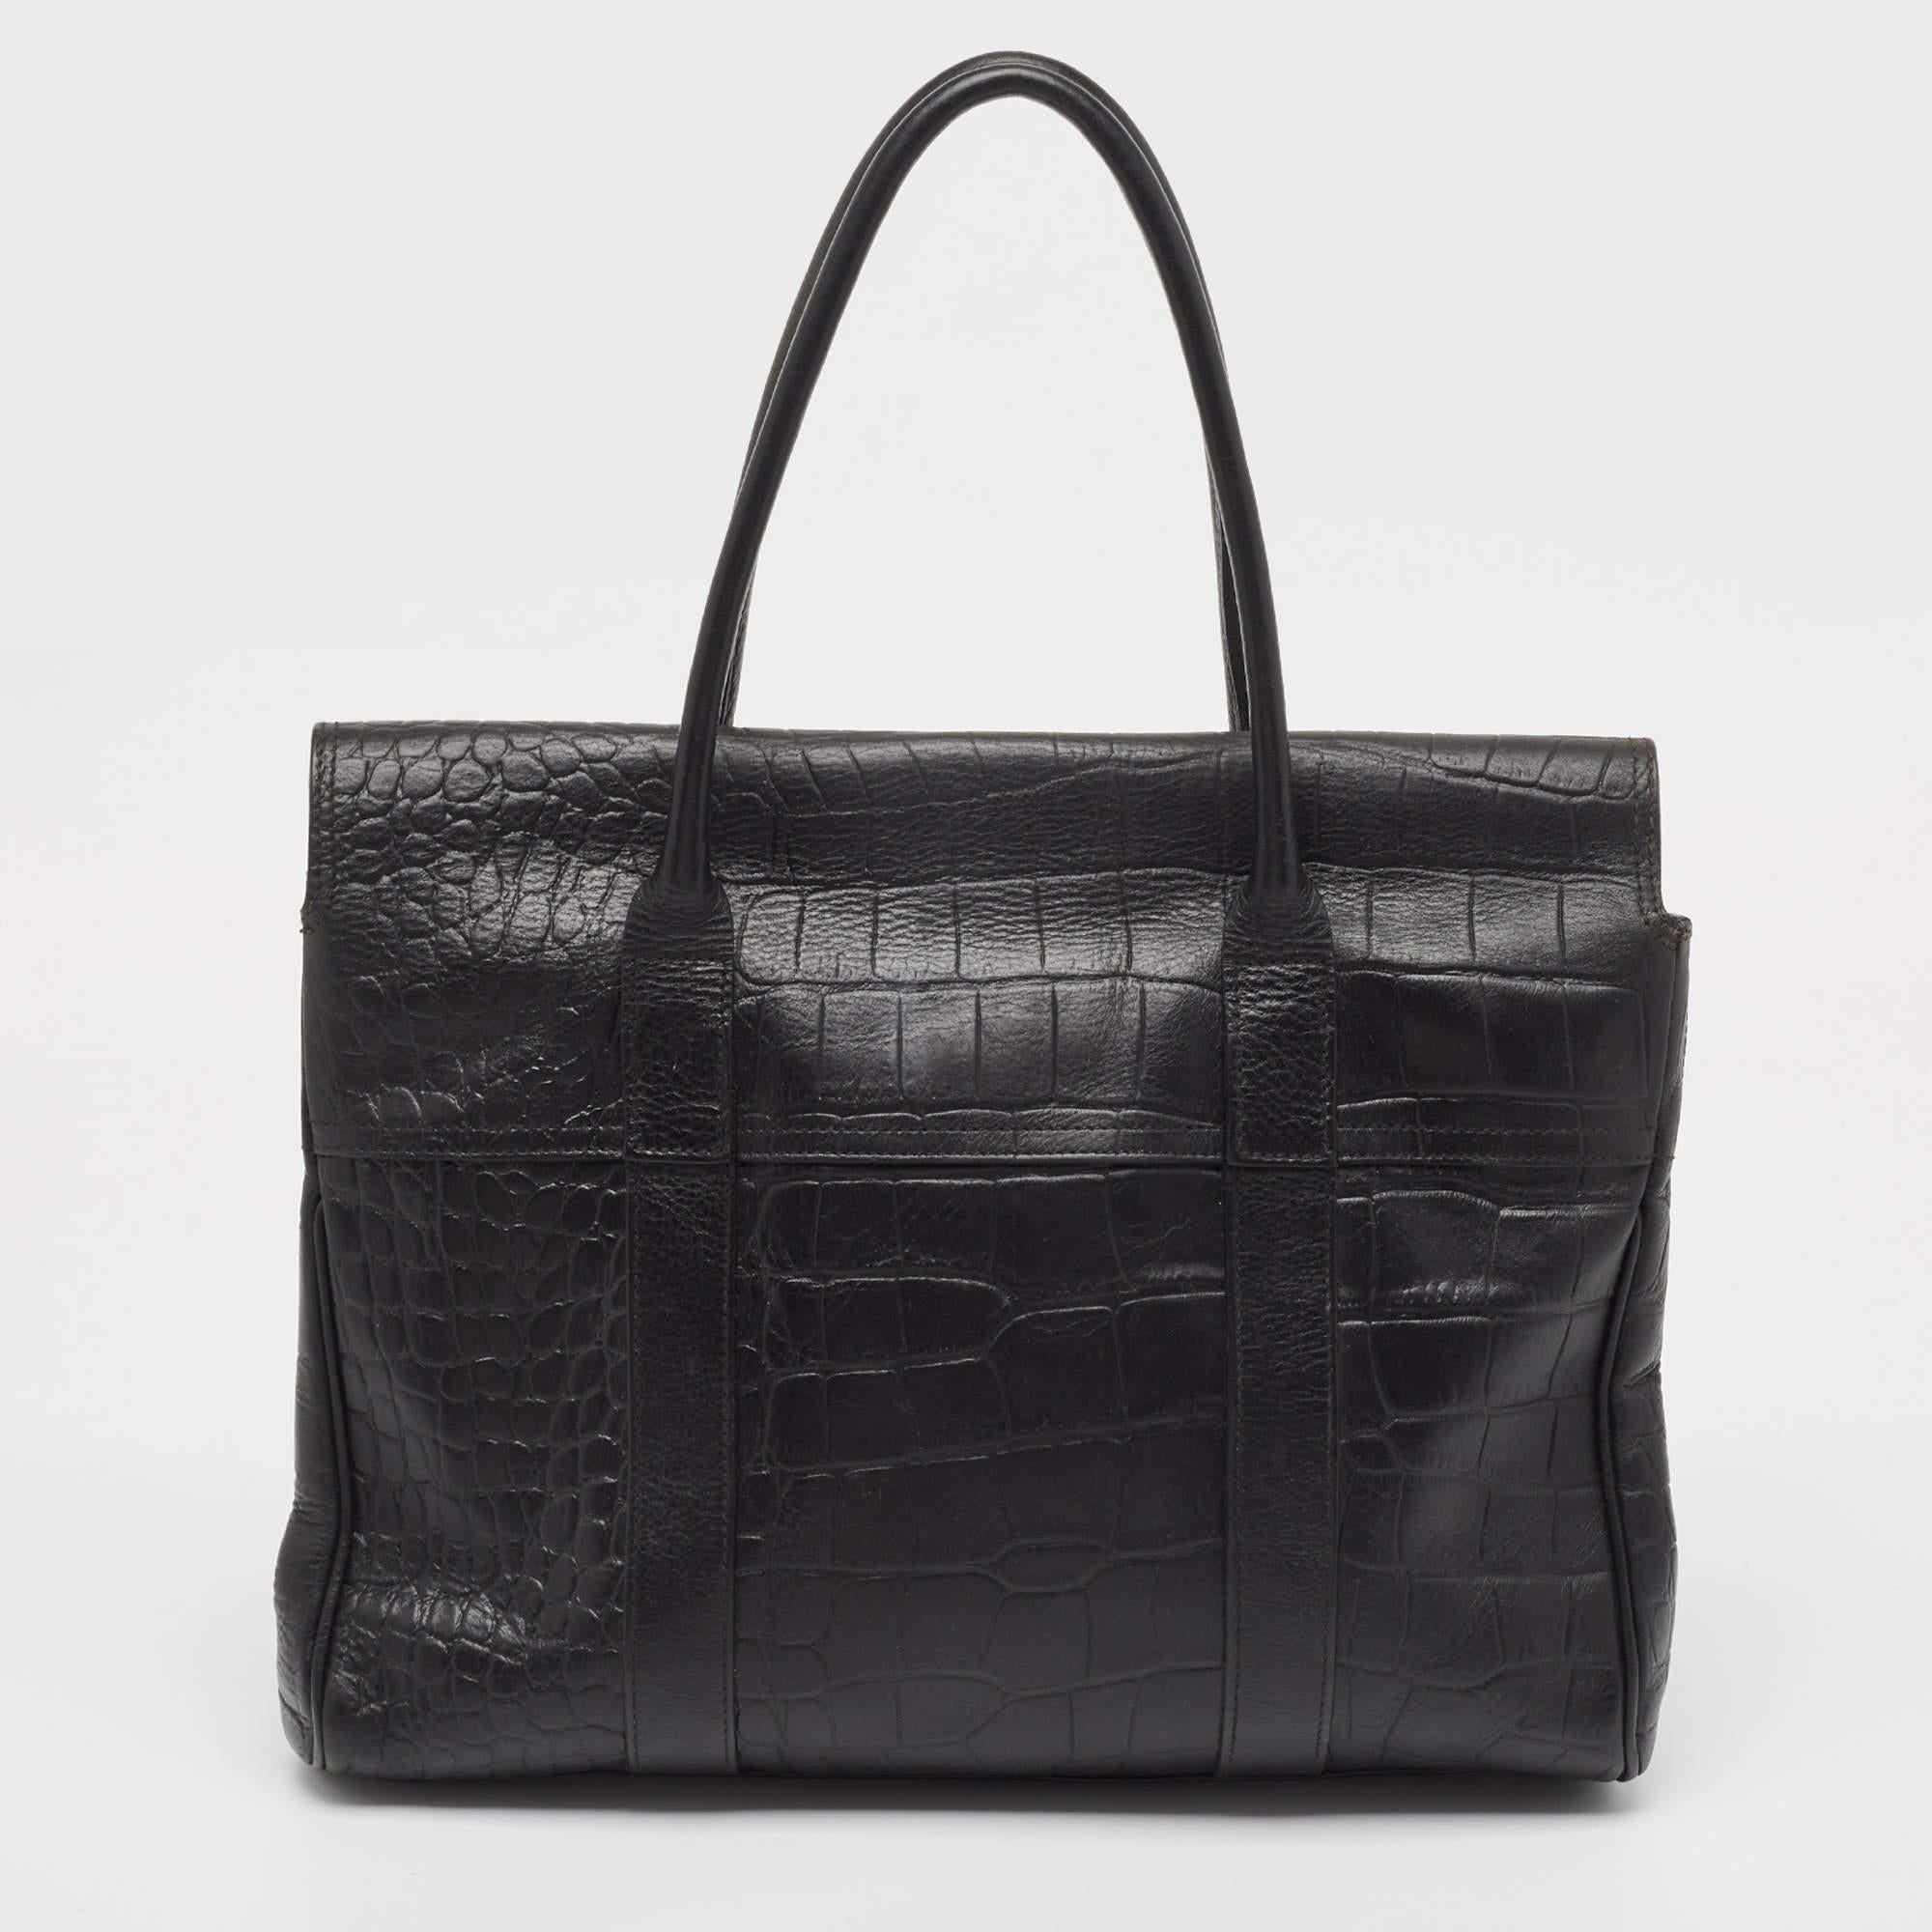 Women's Mulberry Black Croc Embossed Leather Bayswater Satchel